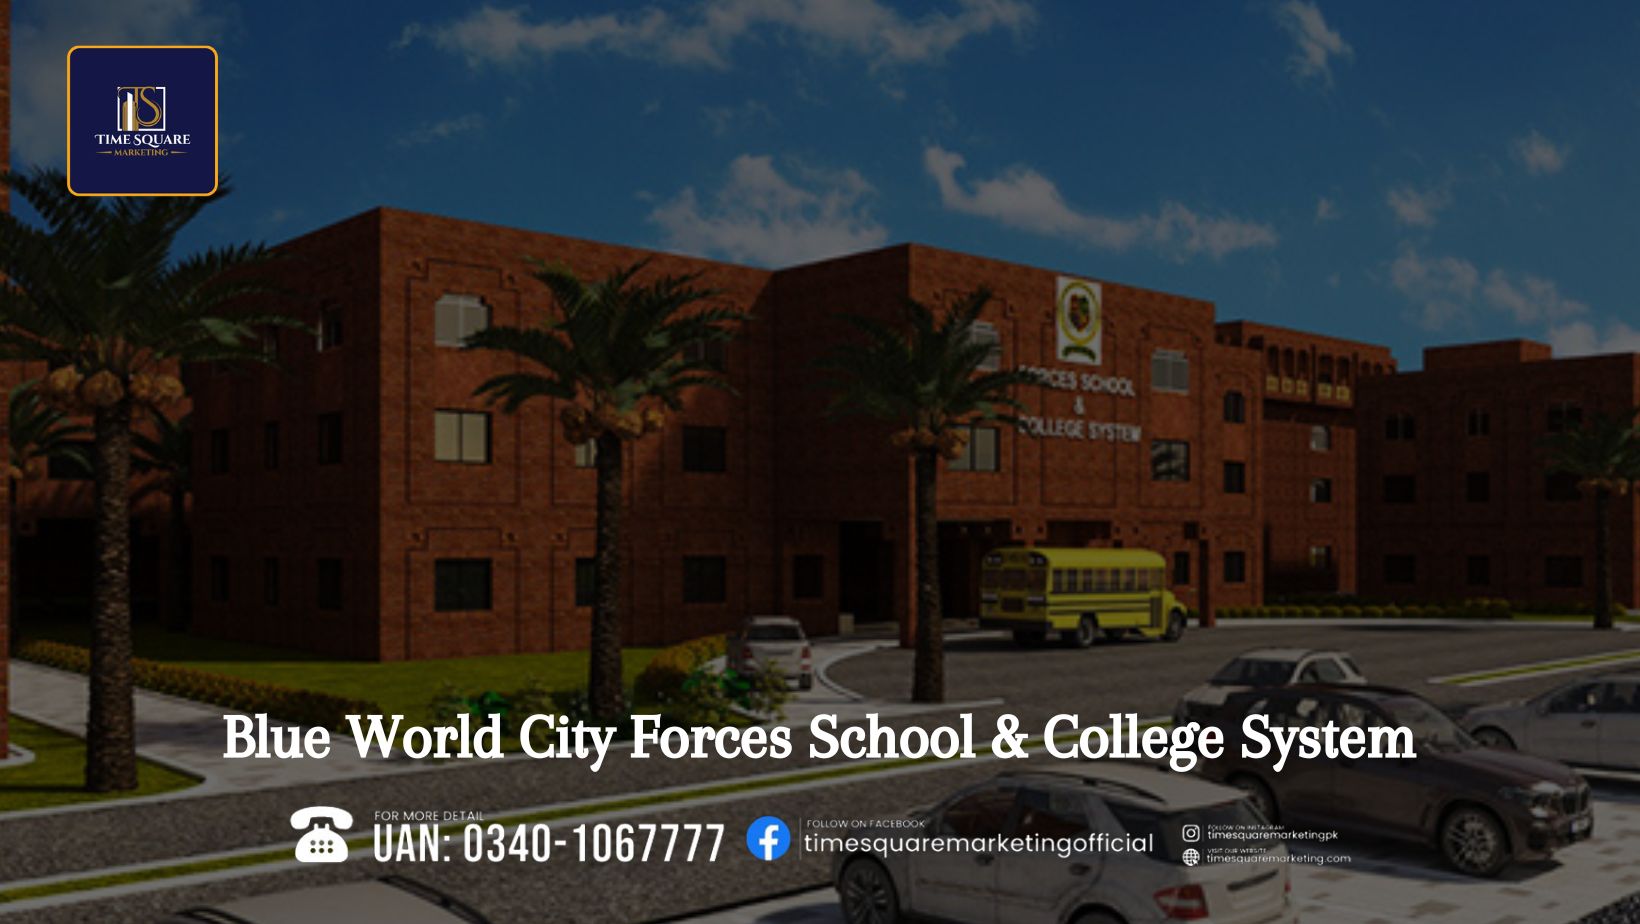 Blue World City Forces School & College System